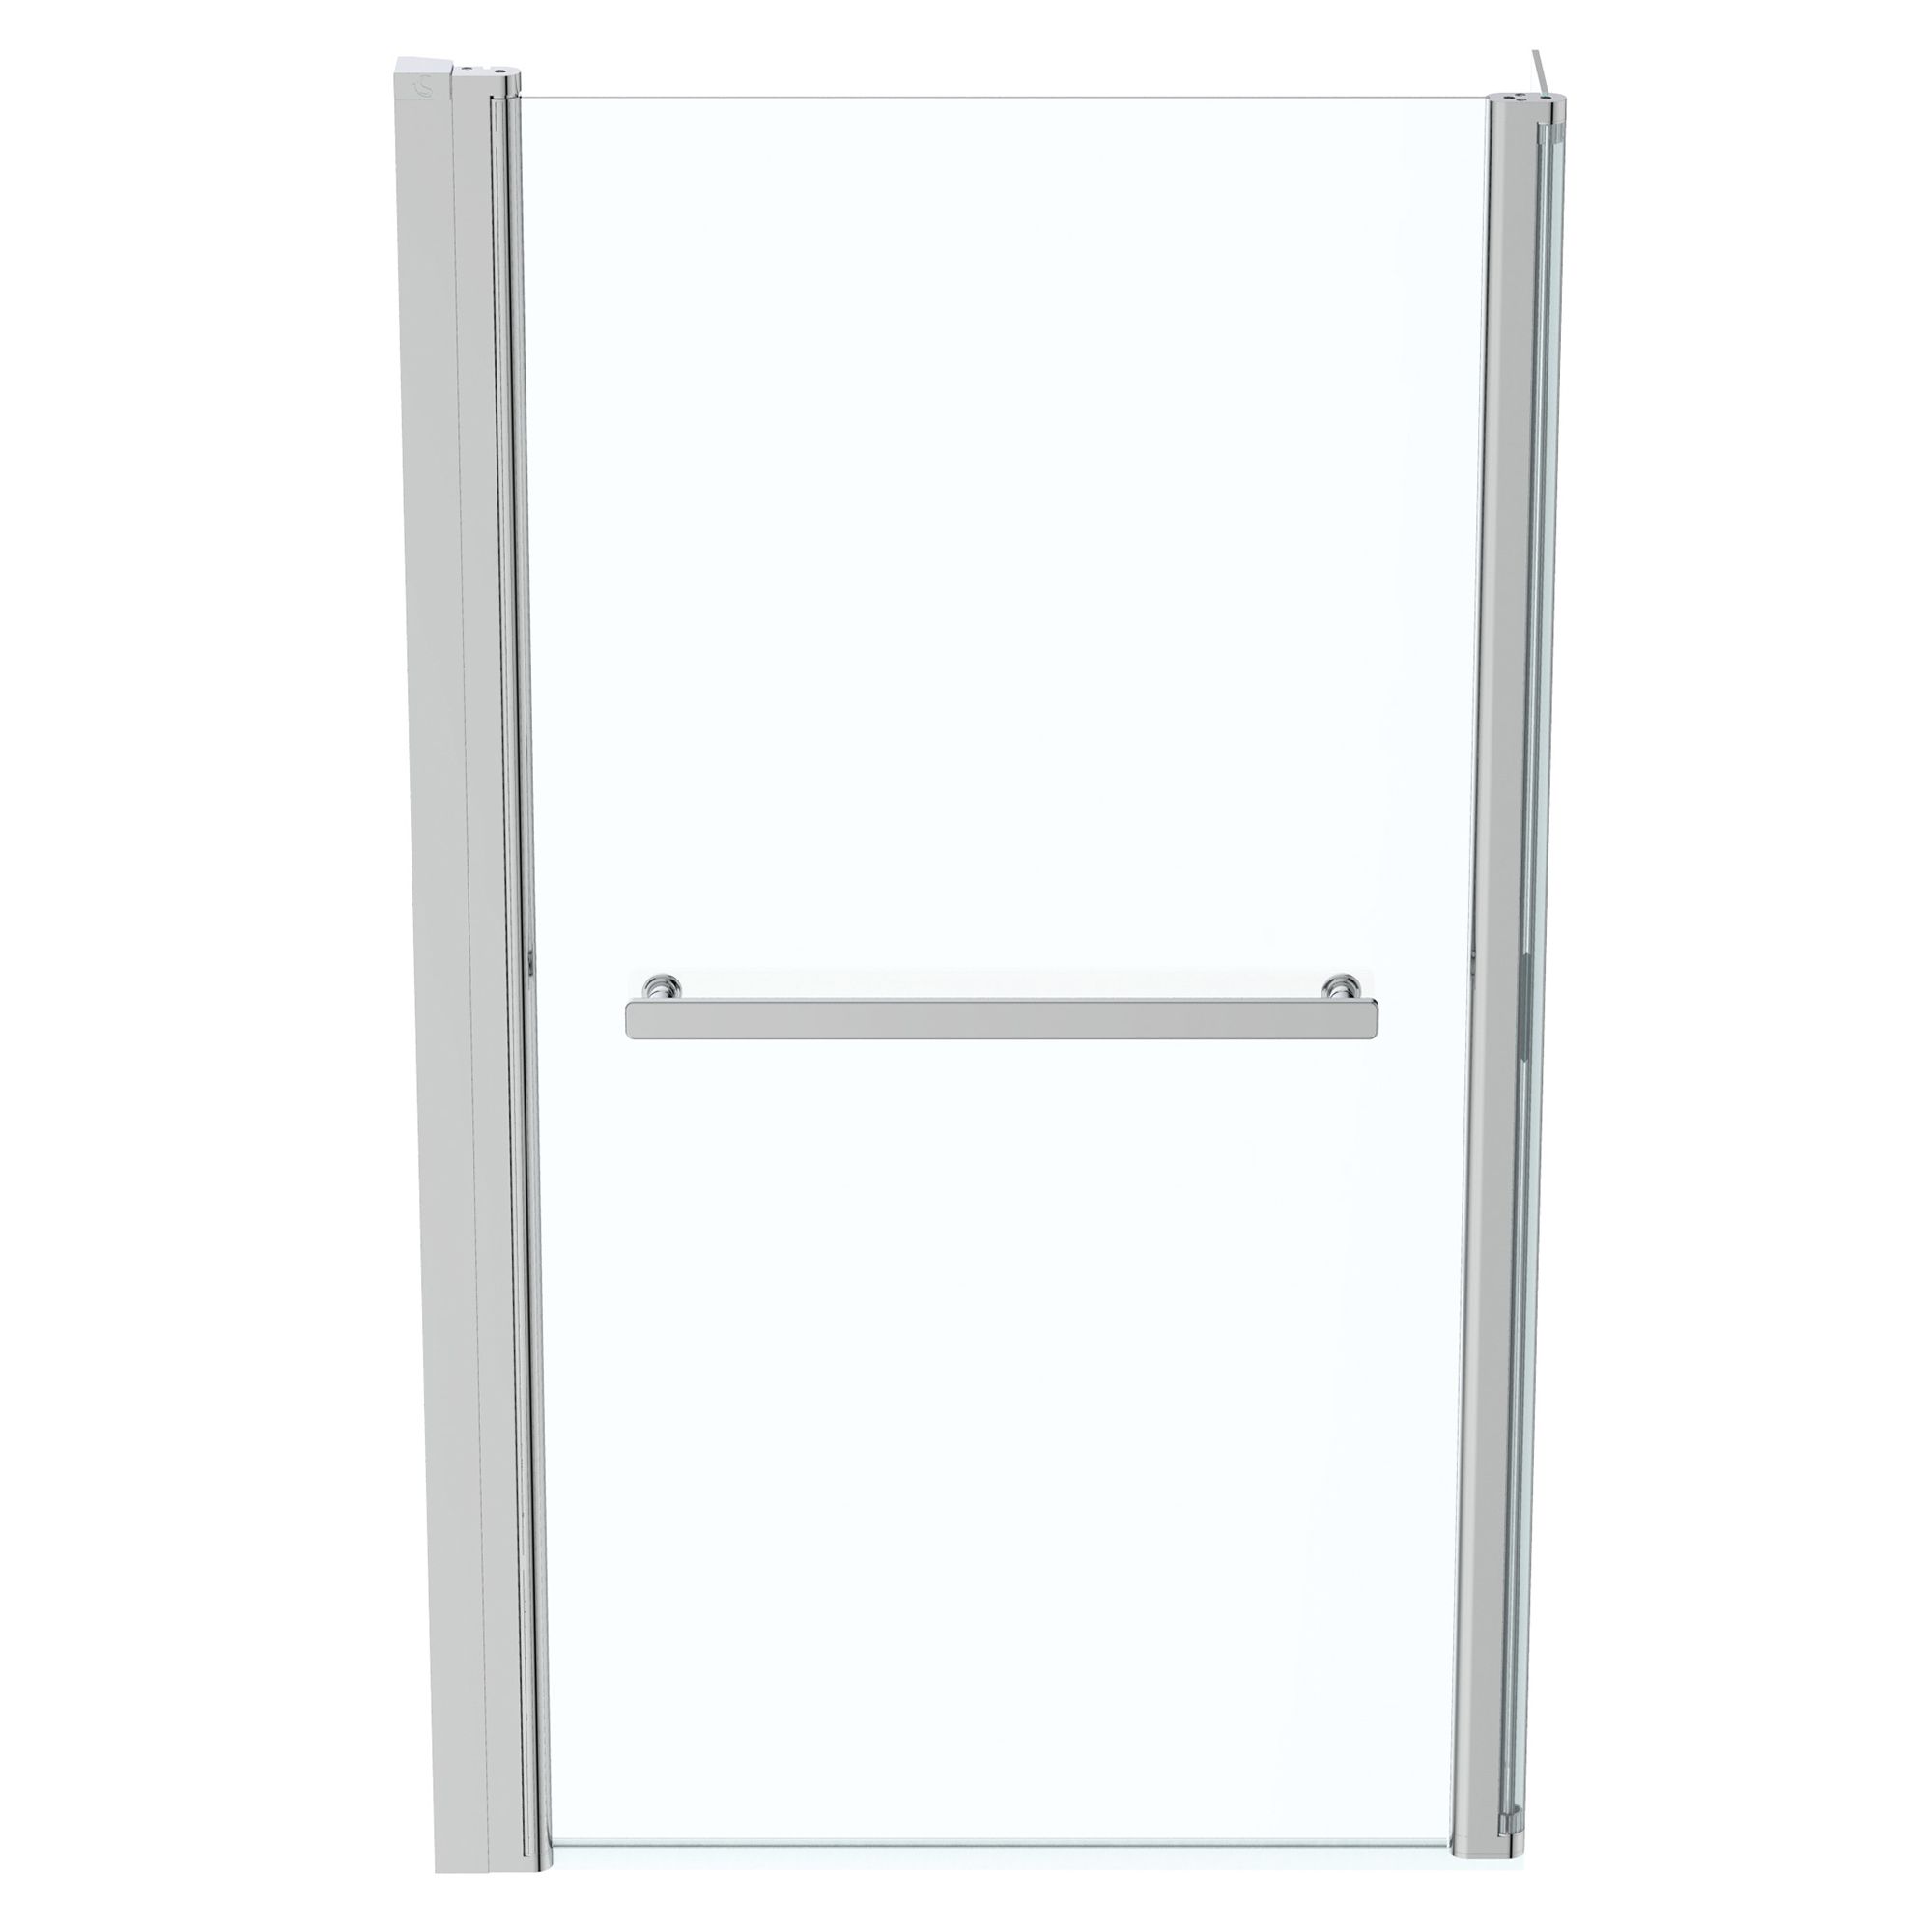 Ideal Standard Concept Space Clear Straight Bright Silver effect frame Bath screen, (H)140.3cm (W)738mm